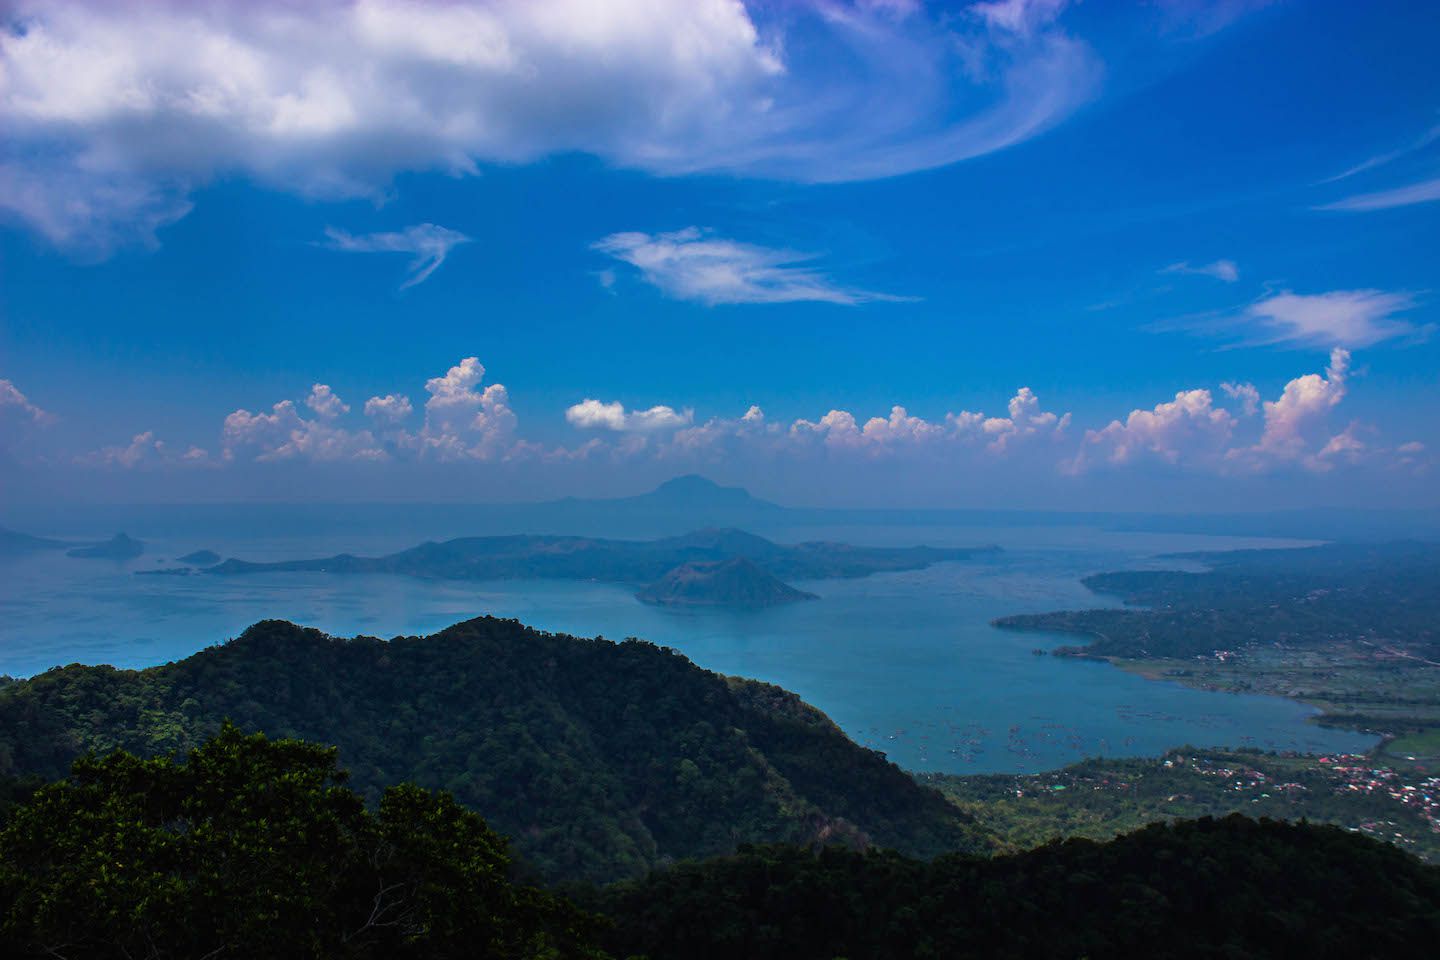 View of Taal Volcano and the lake, Tagaytay, Philippines